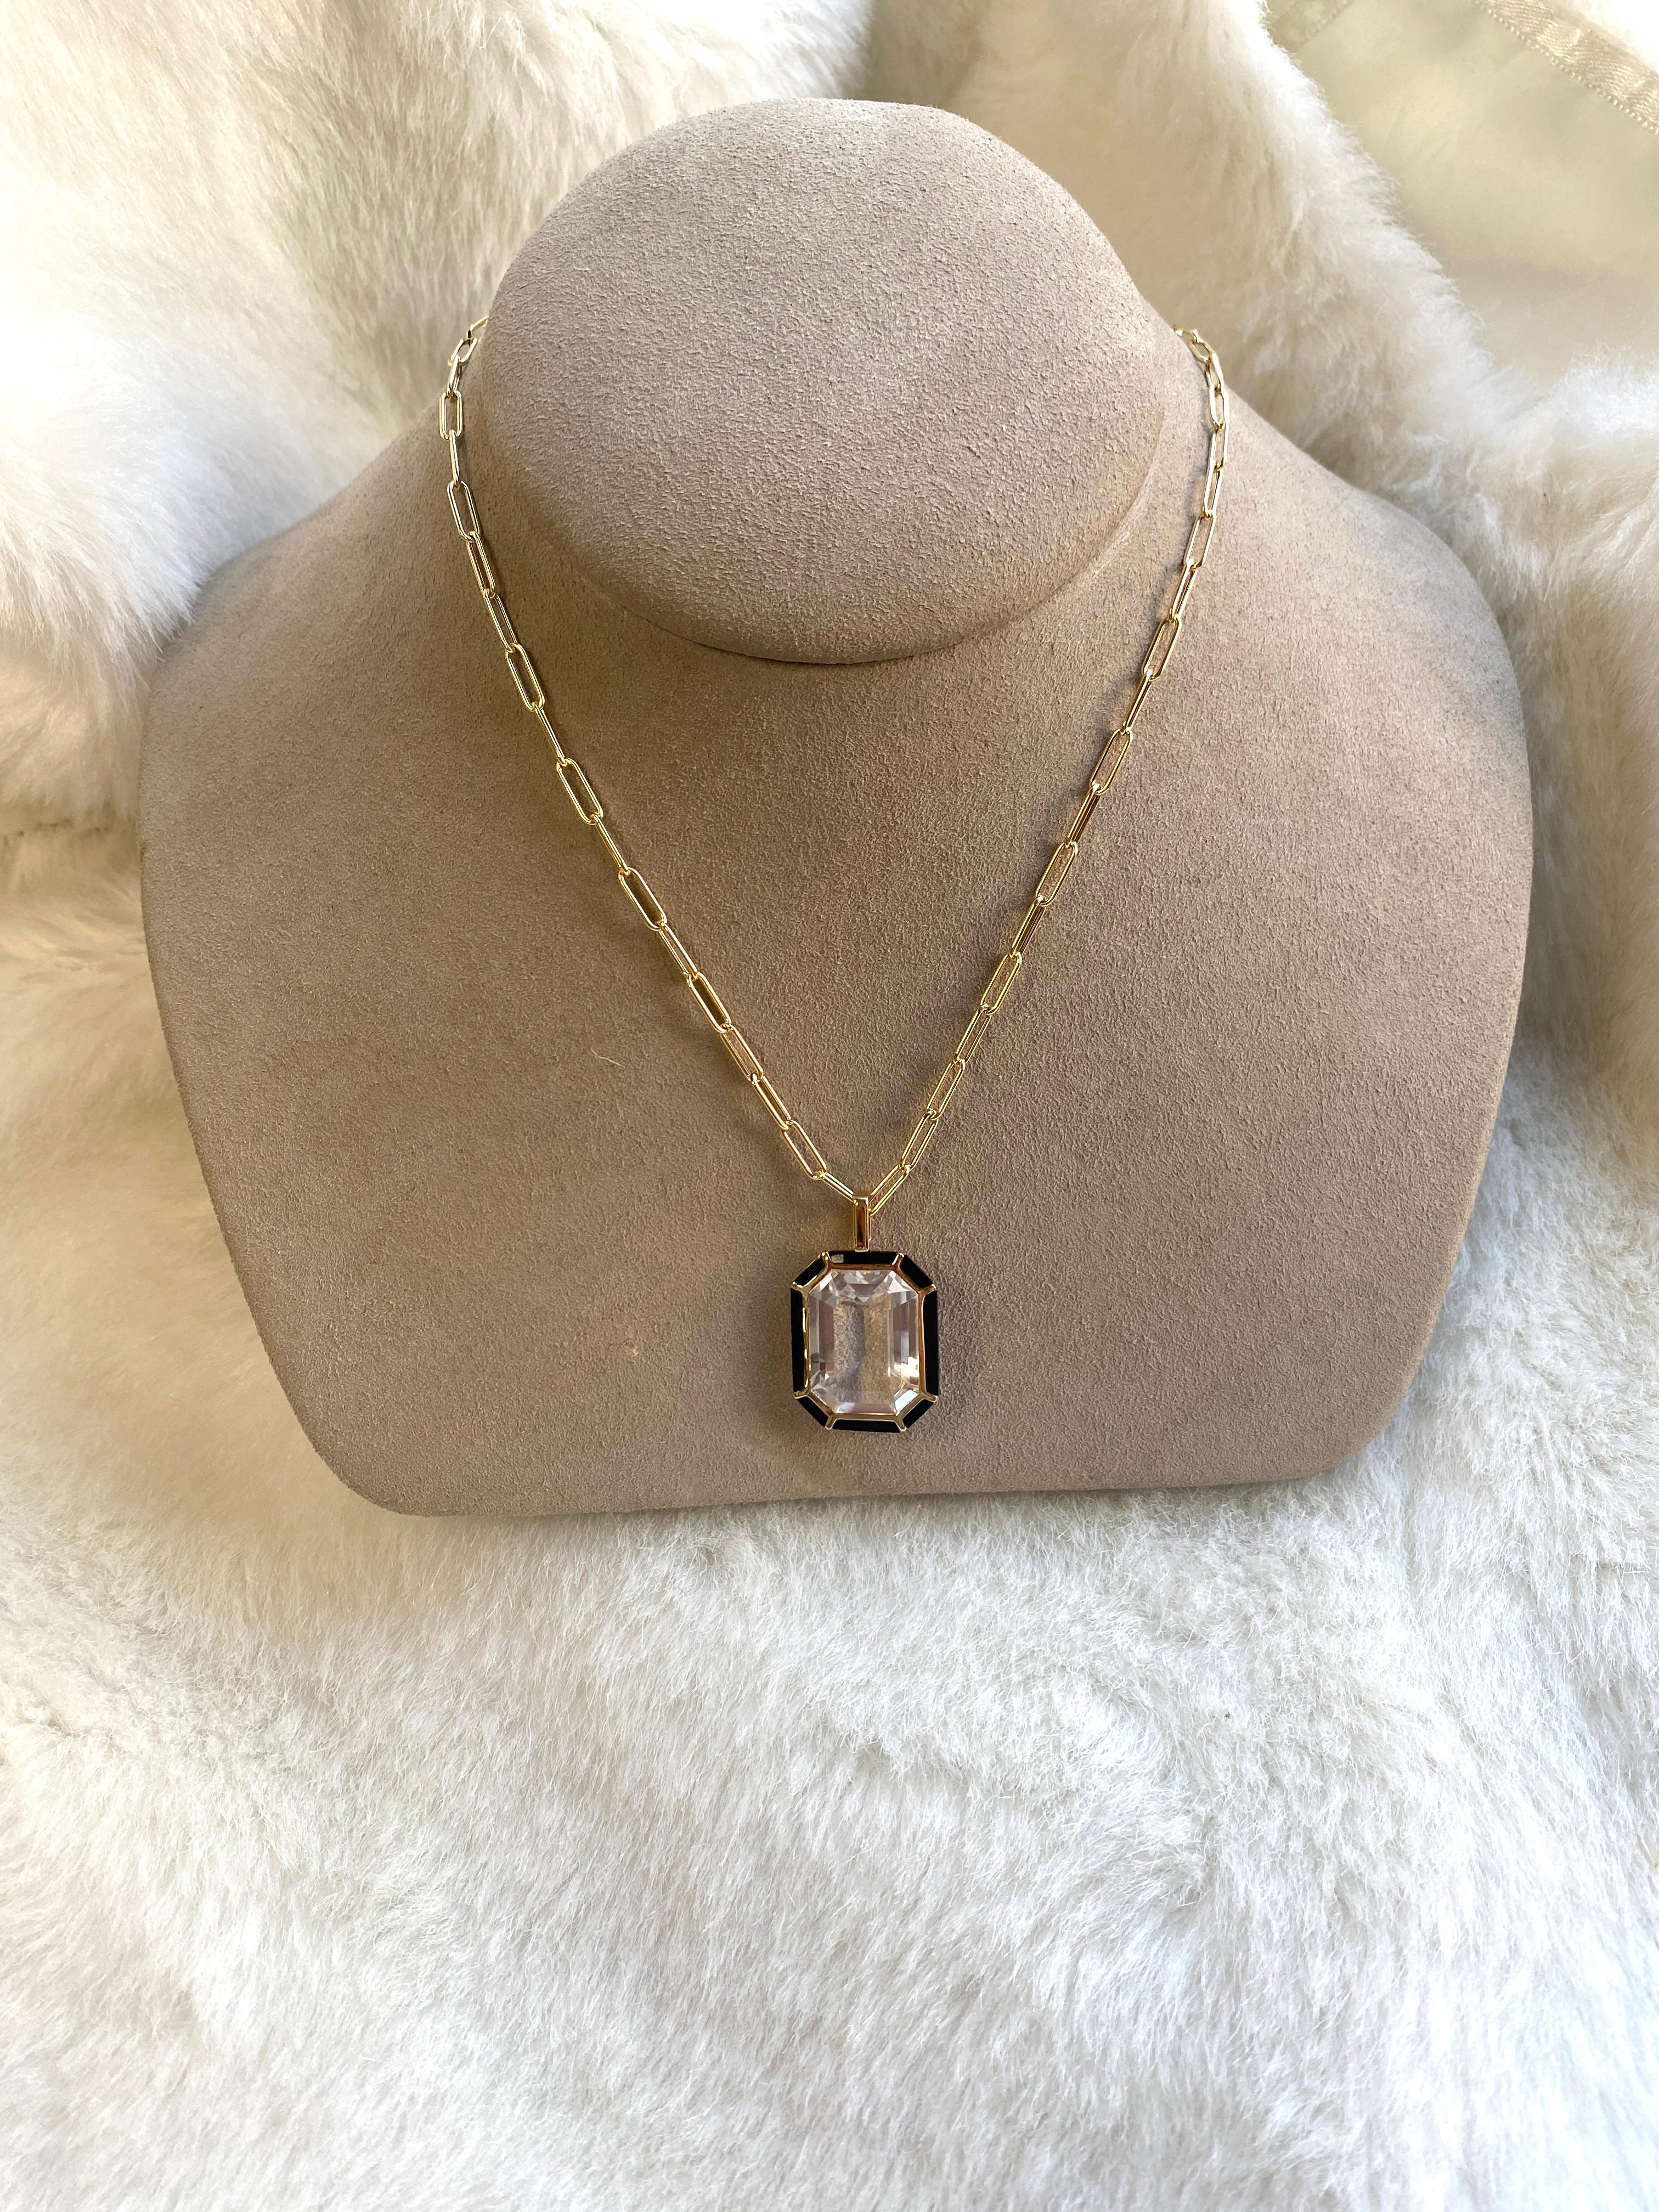 Rock Crystal and Onyx Emerald Cut Pendant in 18K Yellow Gold, from 'Mélange' Collection.

Beautifully crafted, these special pieces from Goshwara are not to be missed!

* Chain Length: 18 in
* Gemstone: 100% Earth Mined 
* Approx. gemstone Weight: